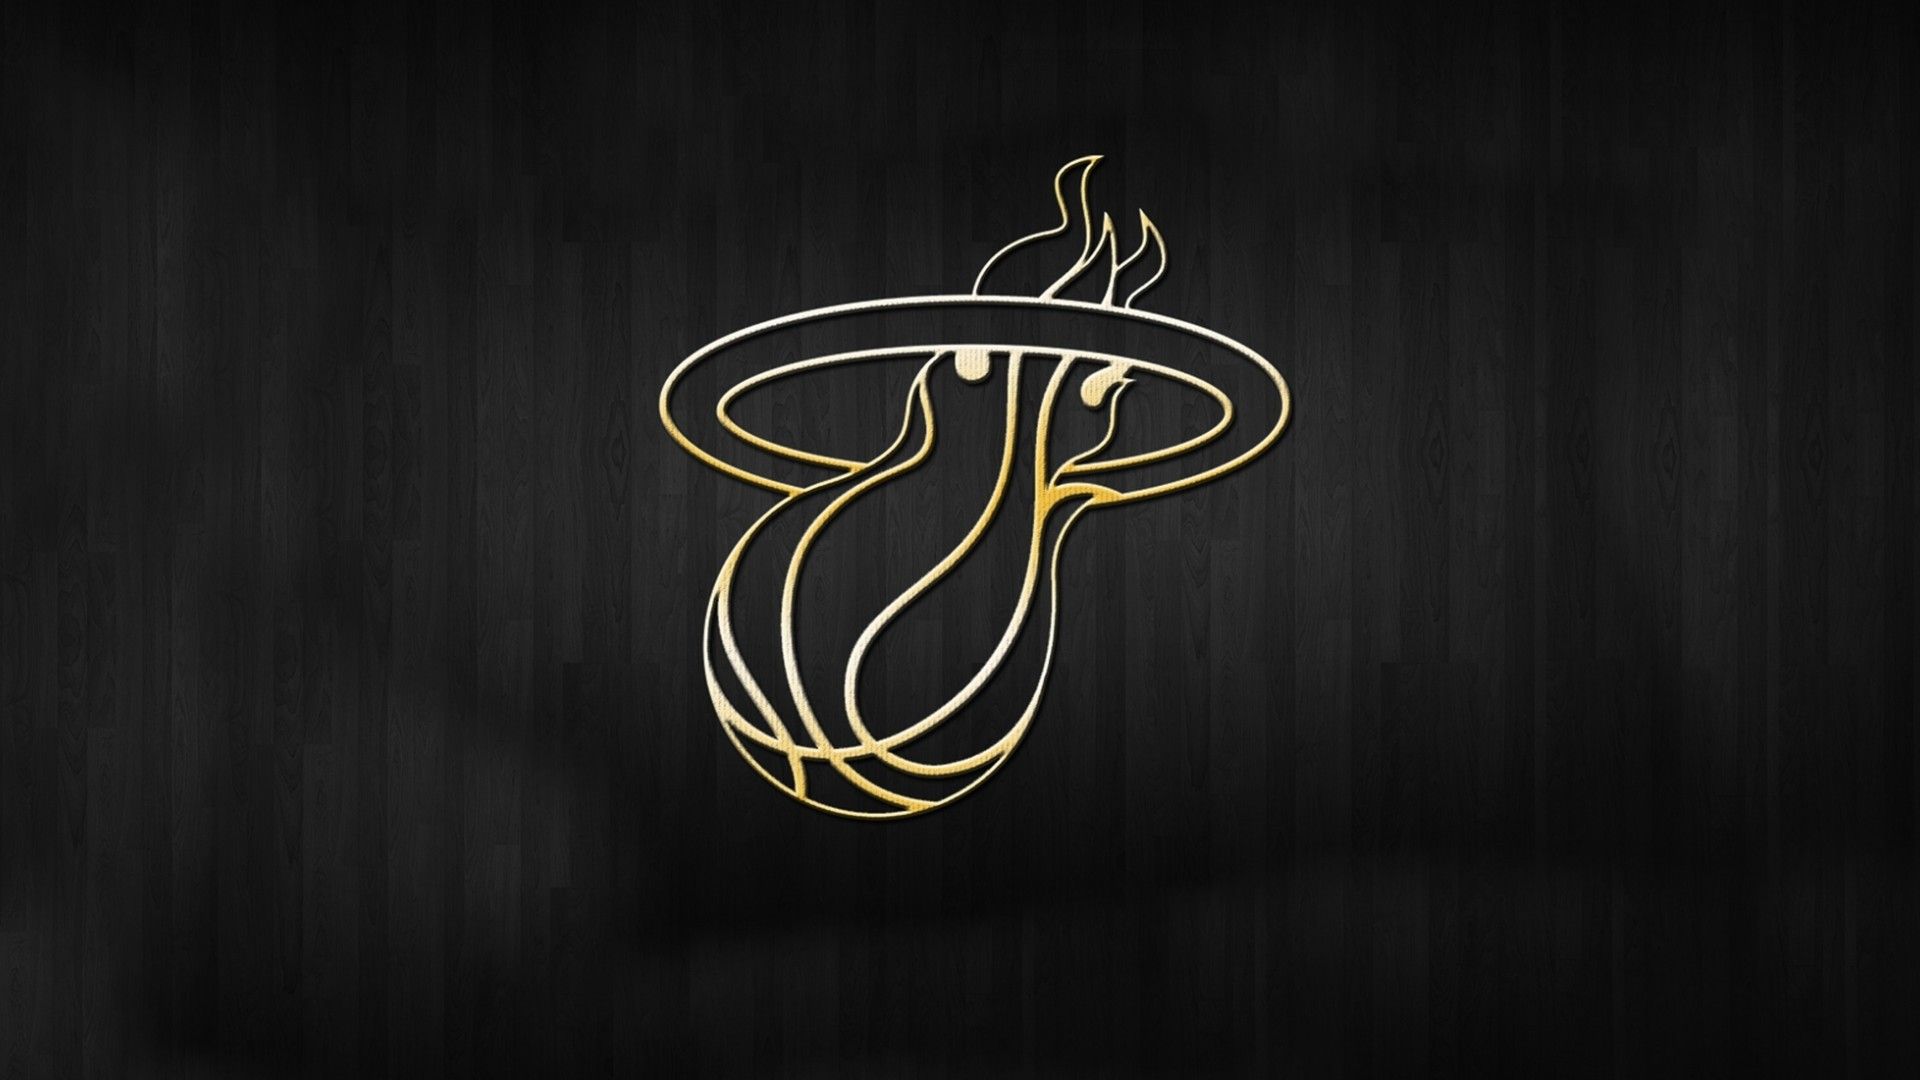 Gold logo basketball team wallpaper and image, picture, photo